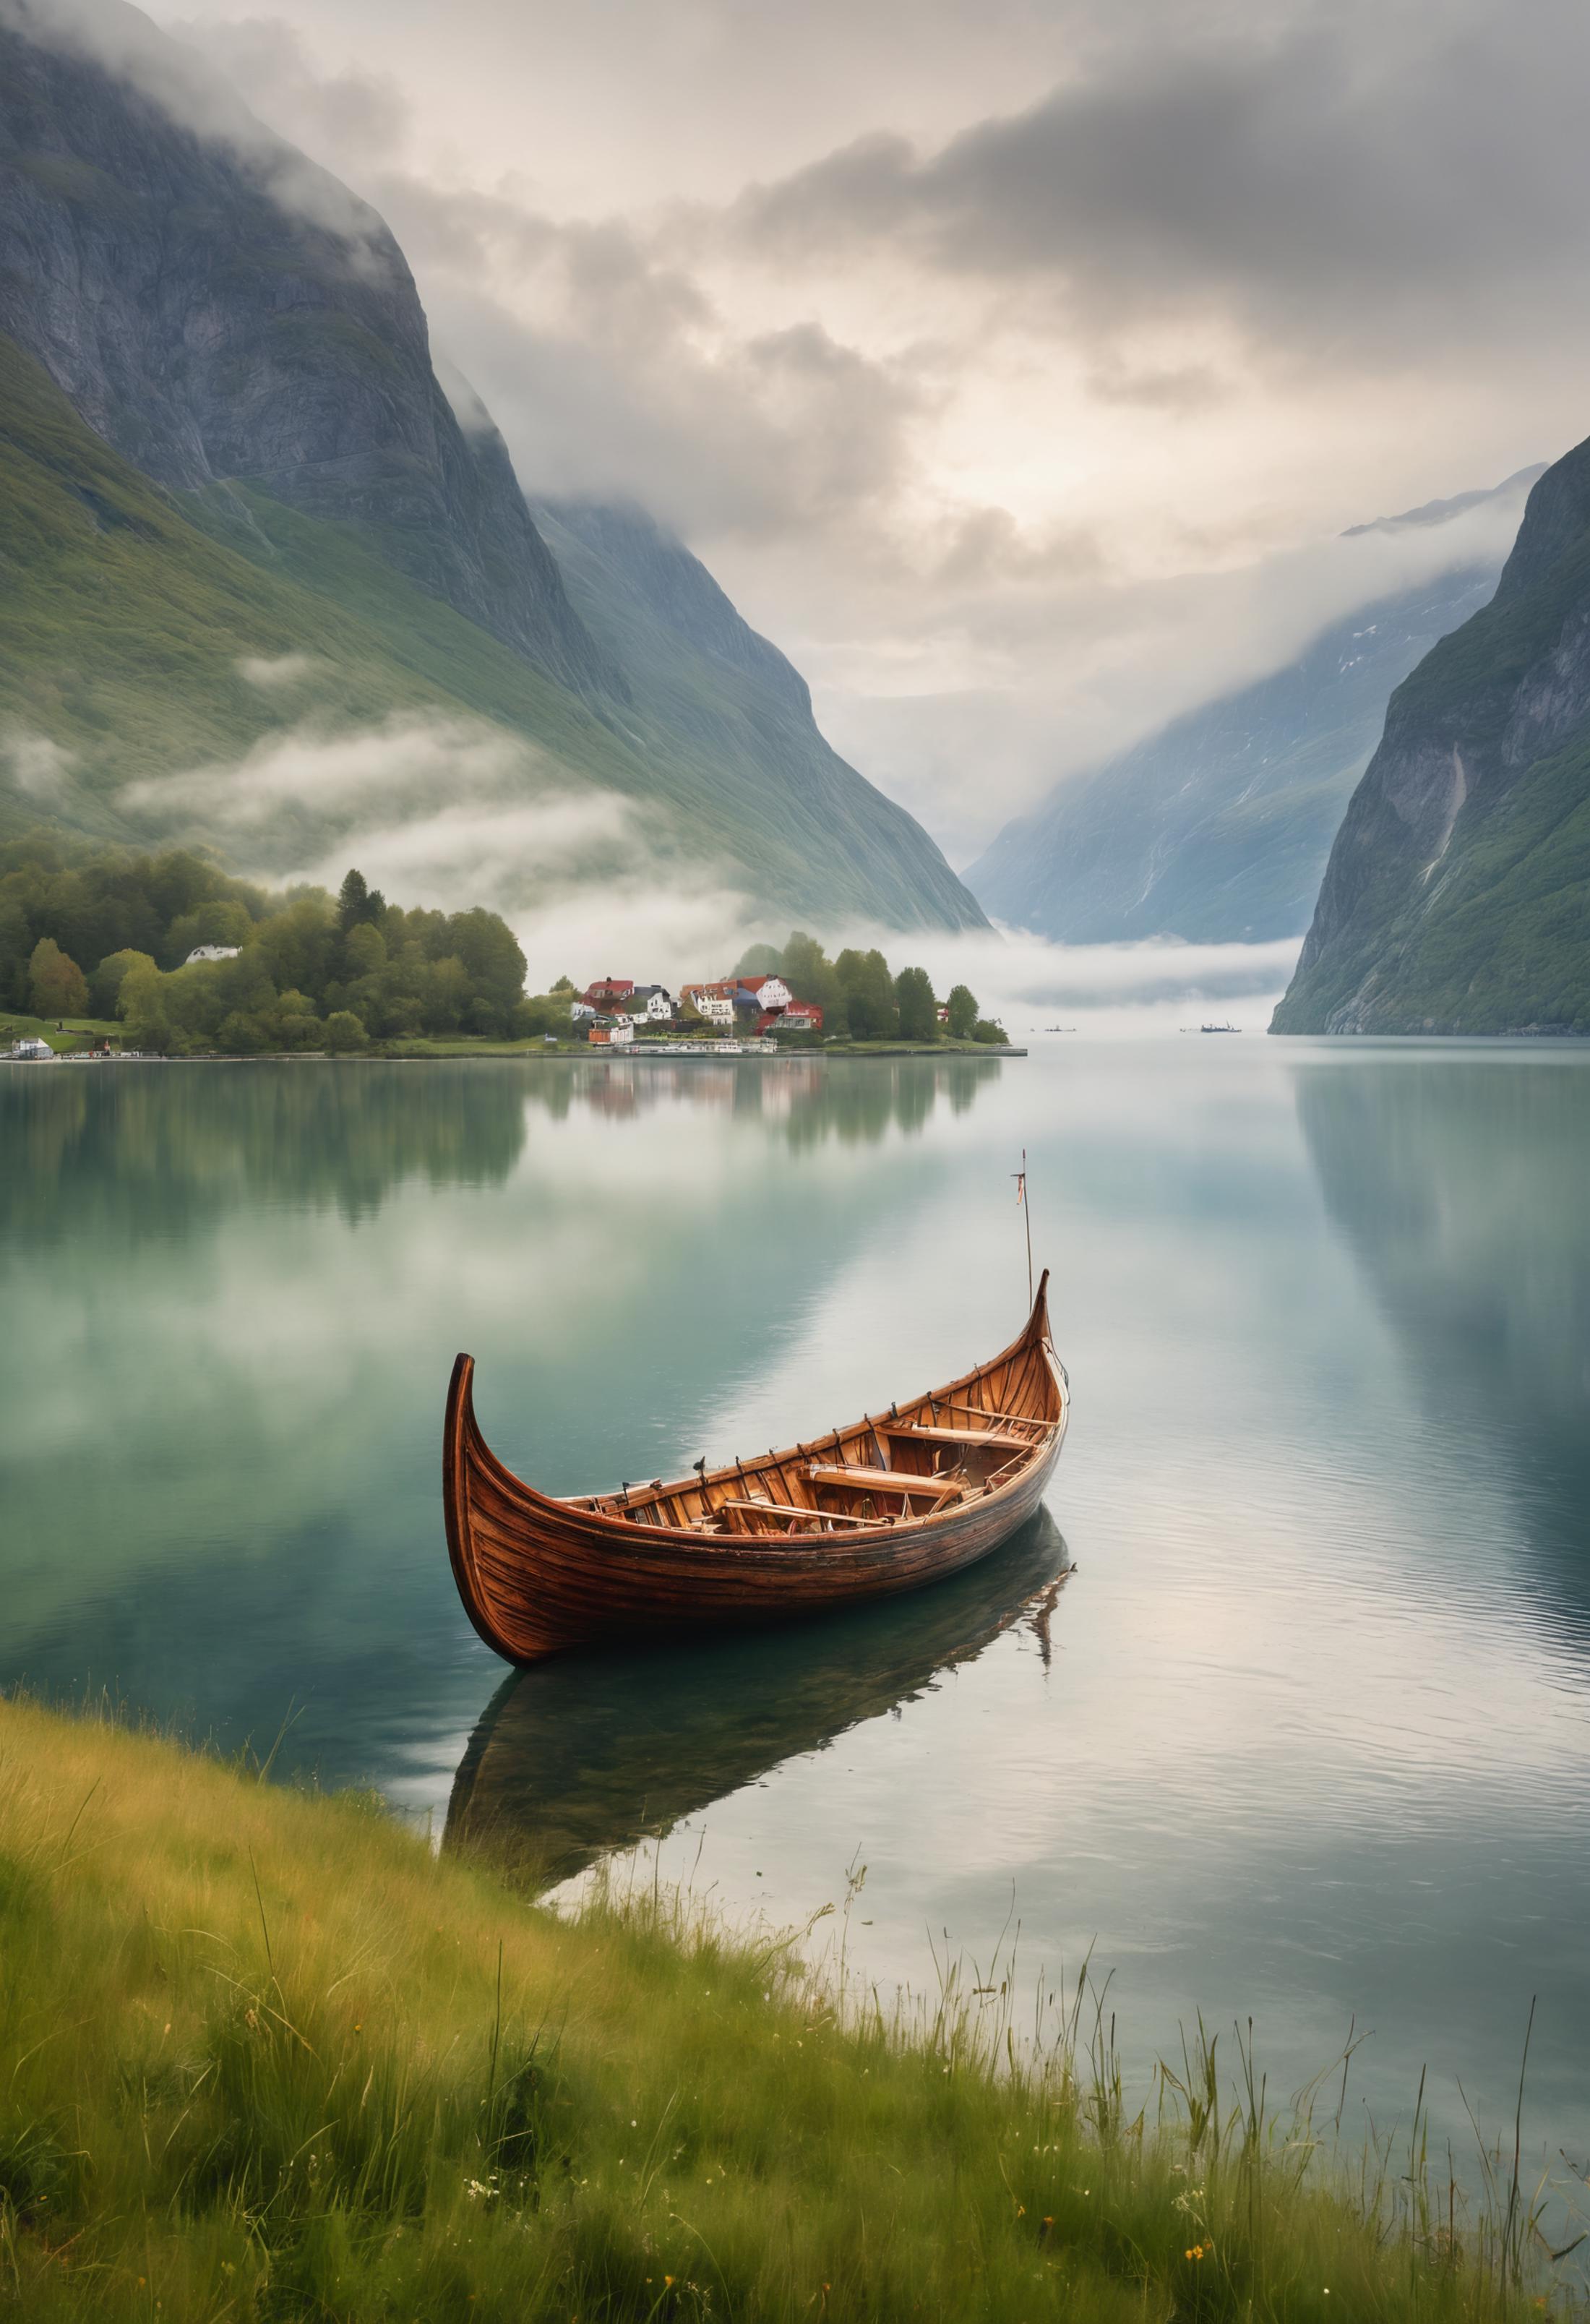 A boat rests on a body of water in front of a mountain range.